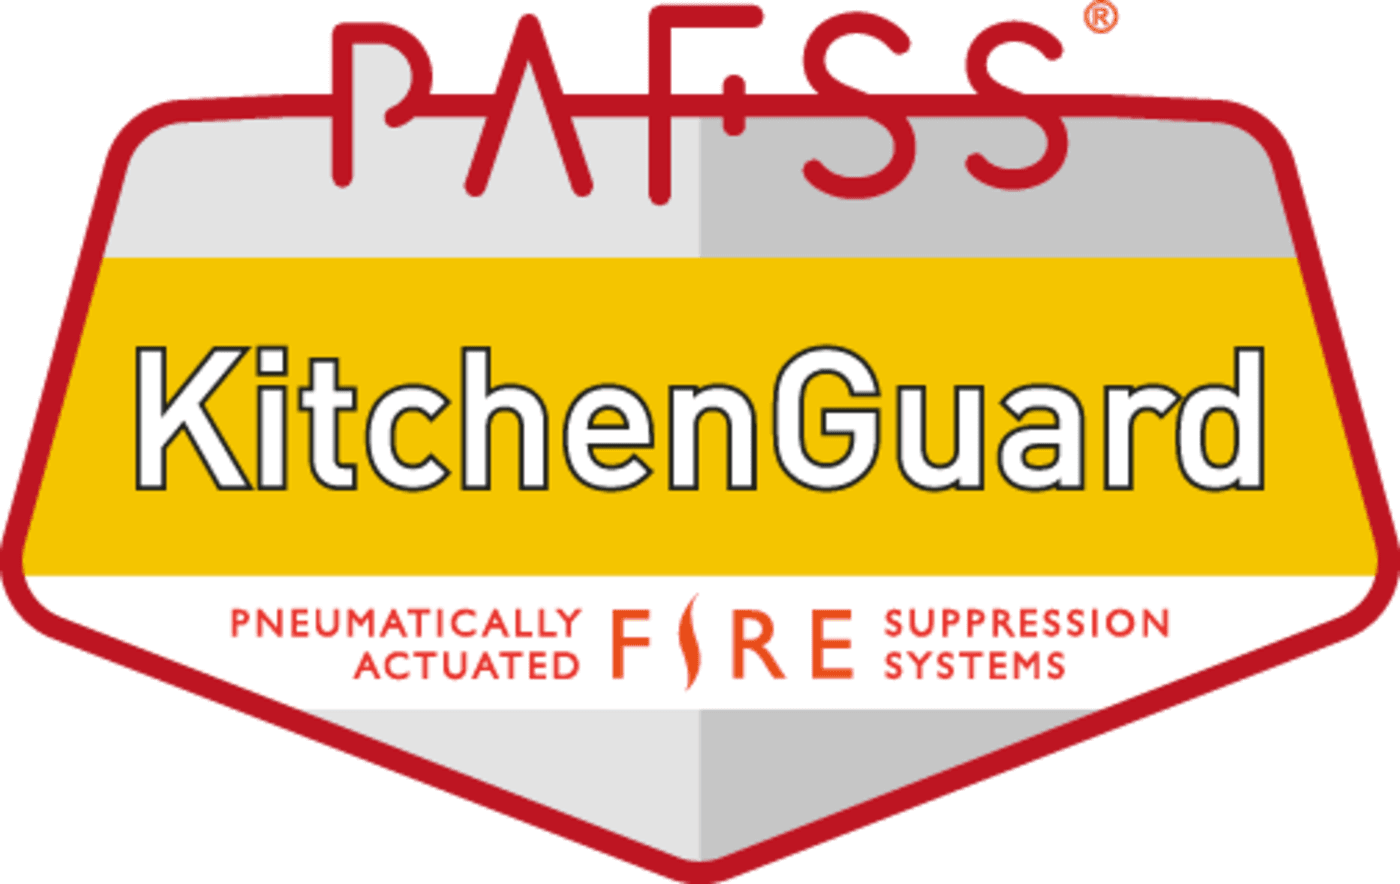 Unique Features of PAFSS KitchenGuard Include:...